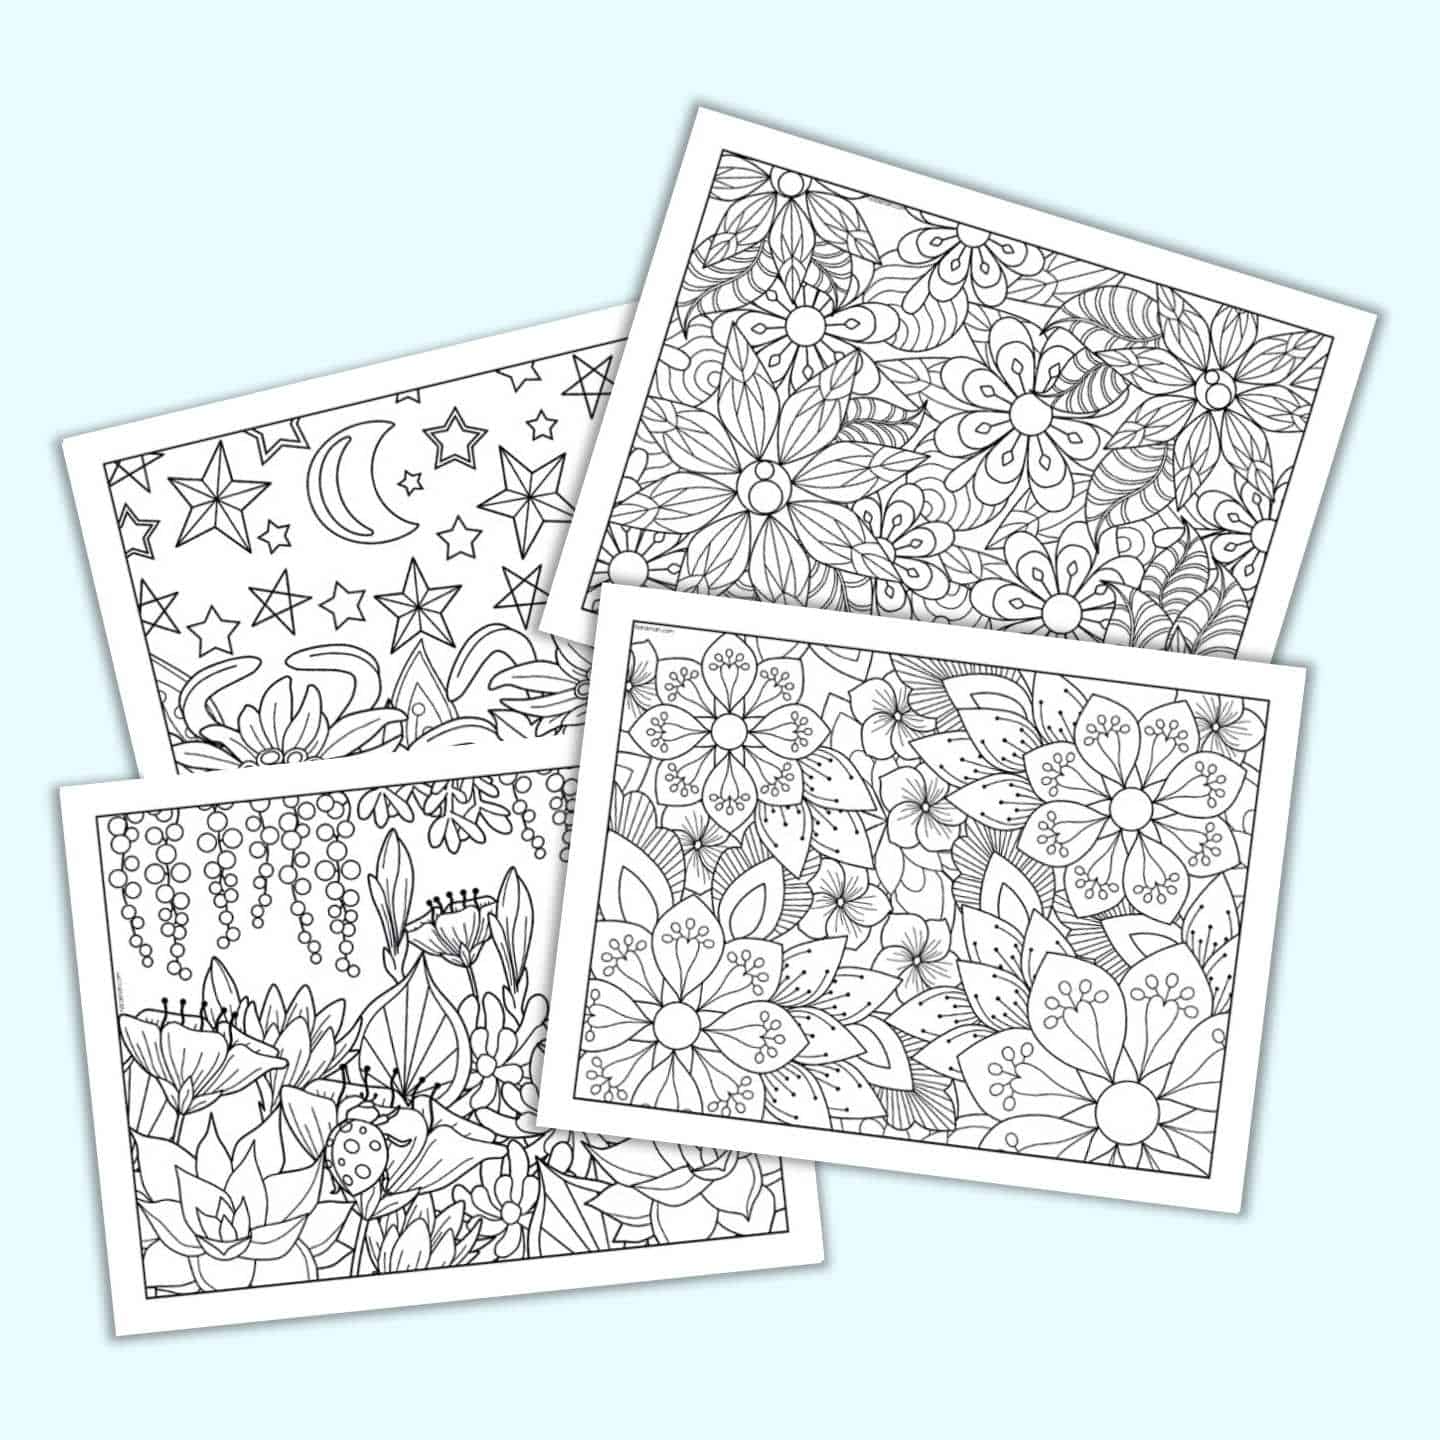 5 Floral Coloring Pages/adults/digital Download 1 -   Mandala coloring  pages, Coloring book art, Coloring pages